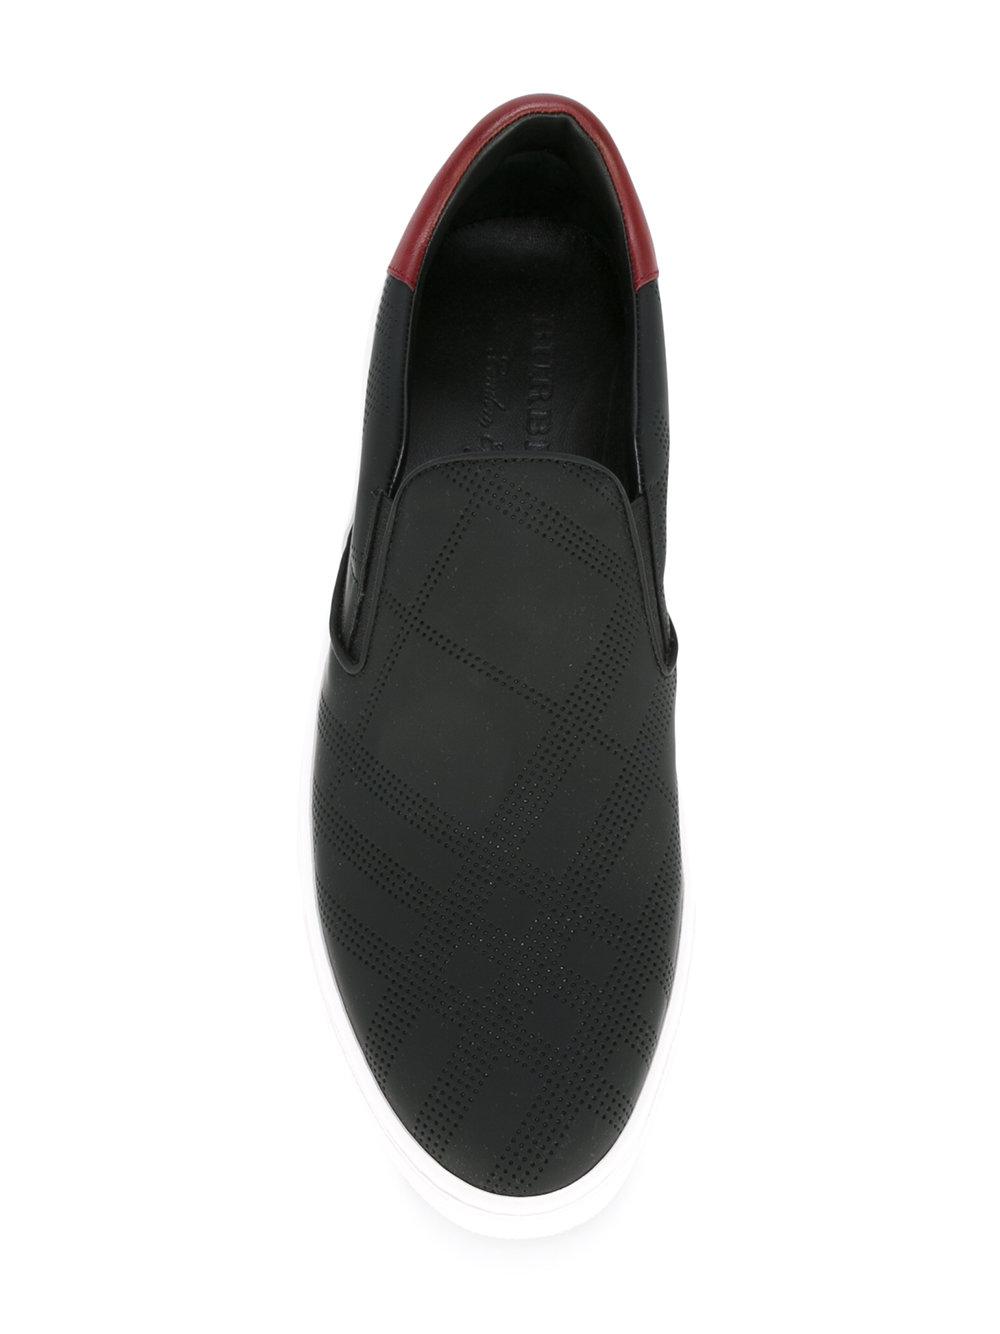 Burberry Leather Slip-on Sneakers in Black for Men - Lyst